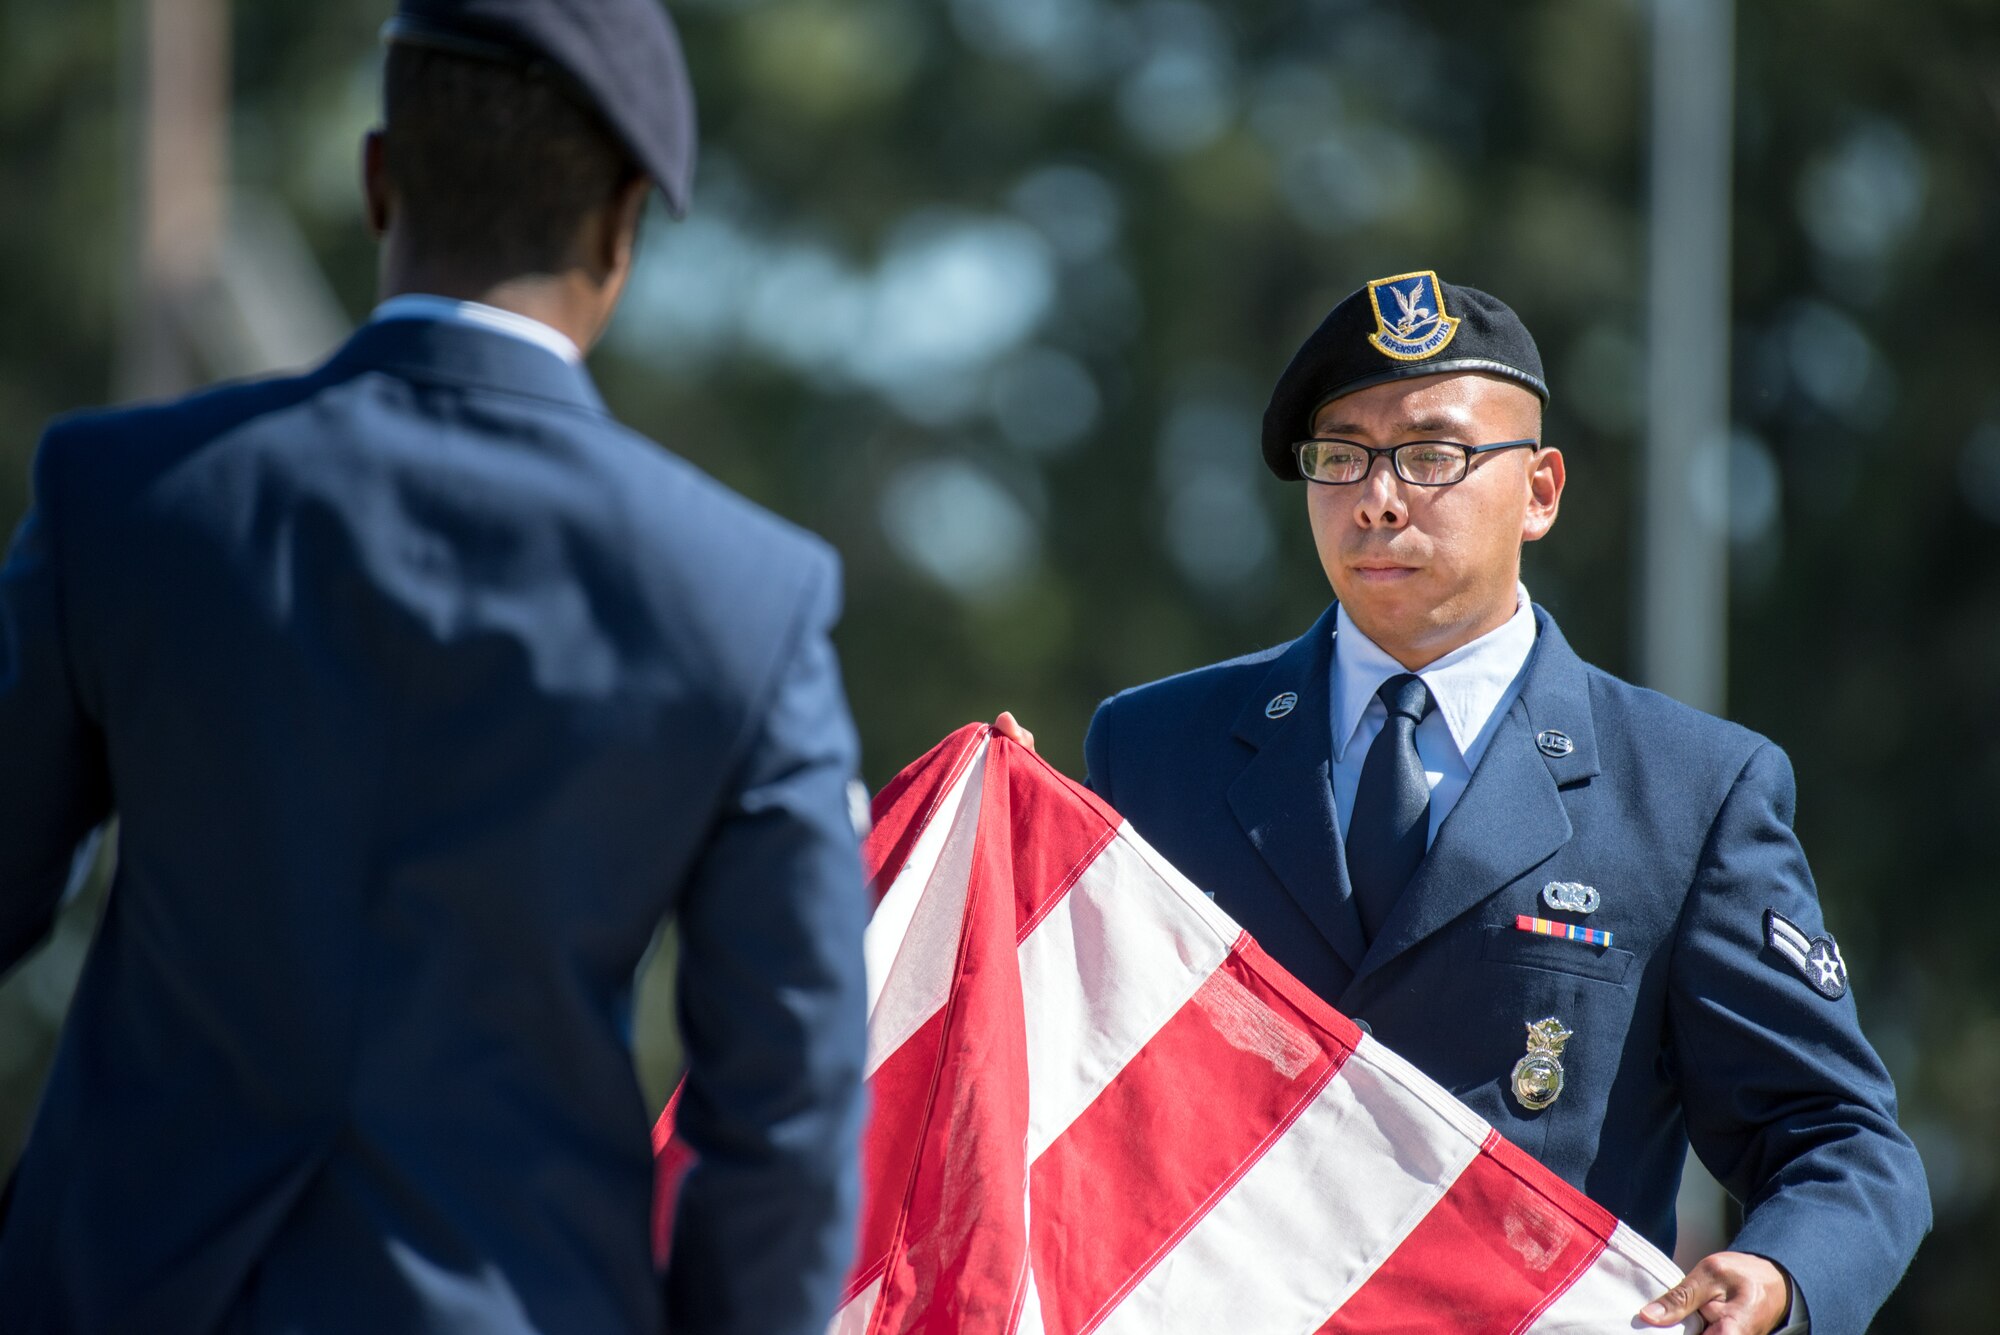 Defenders from the 60th Security Forces Squadron, Travis Air Force Base, Calif., perform a retreat ceremony May 18, 2017. The ceremony was one of several events sponsored by the squadron in honor of Police Week. (U.S. Air Force photo by Louis Briscese)